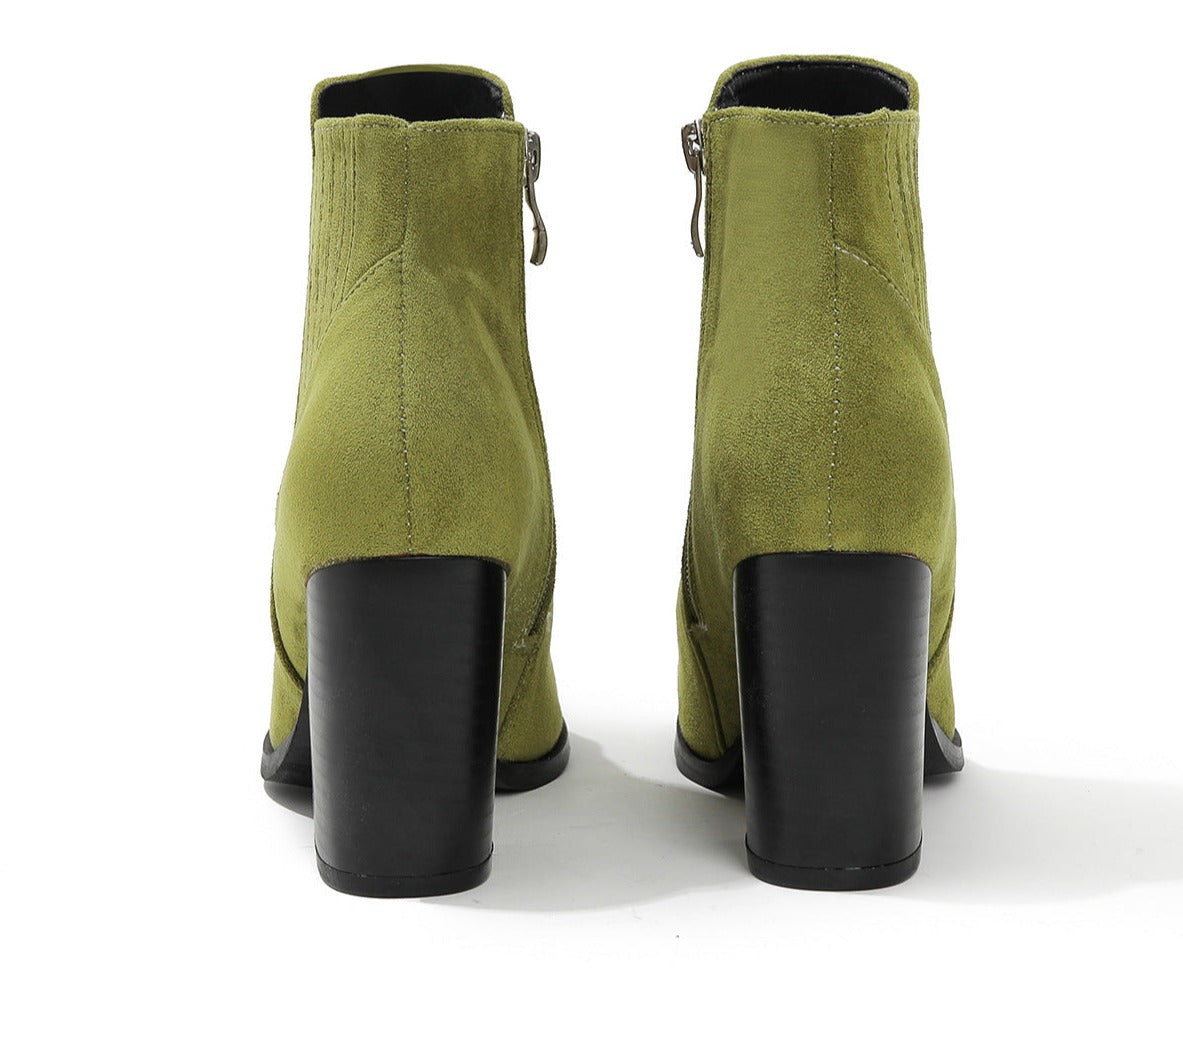 Pointed Toe Block Square Heel Ankle Boots